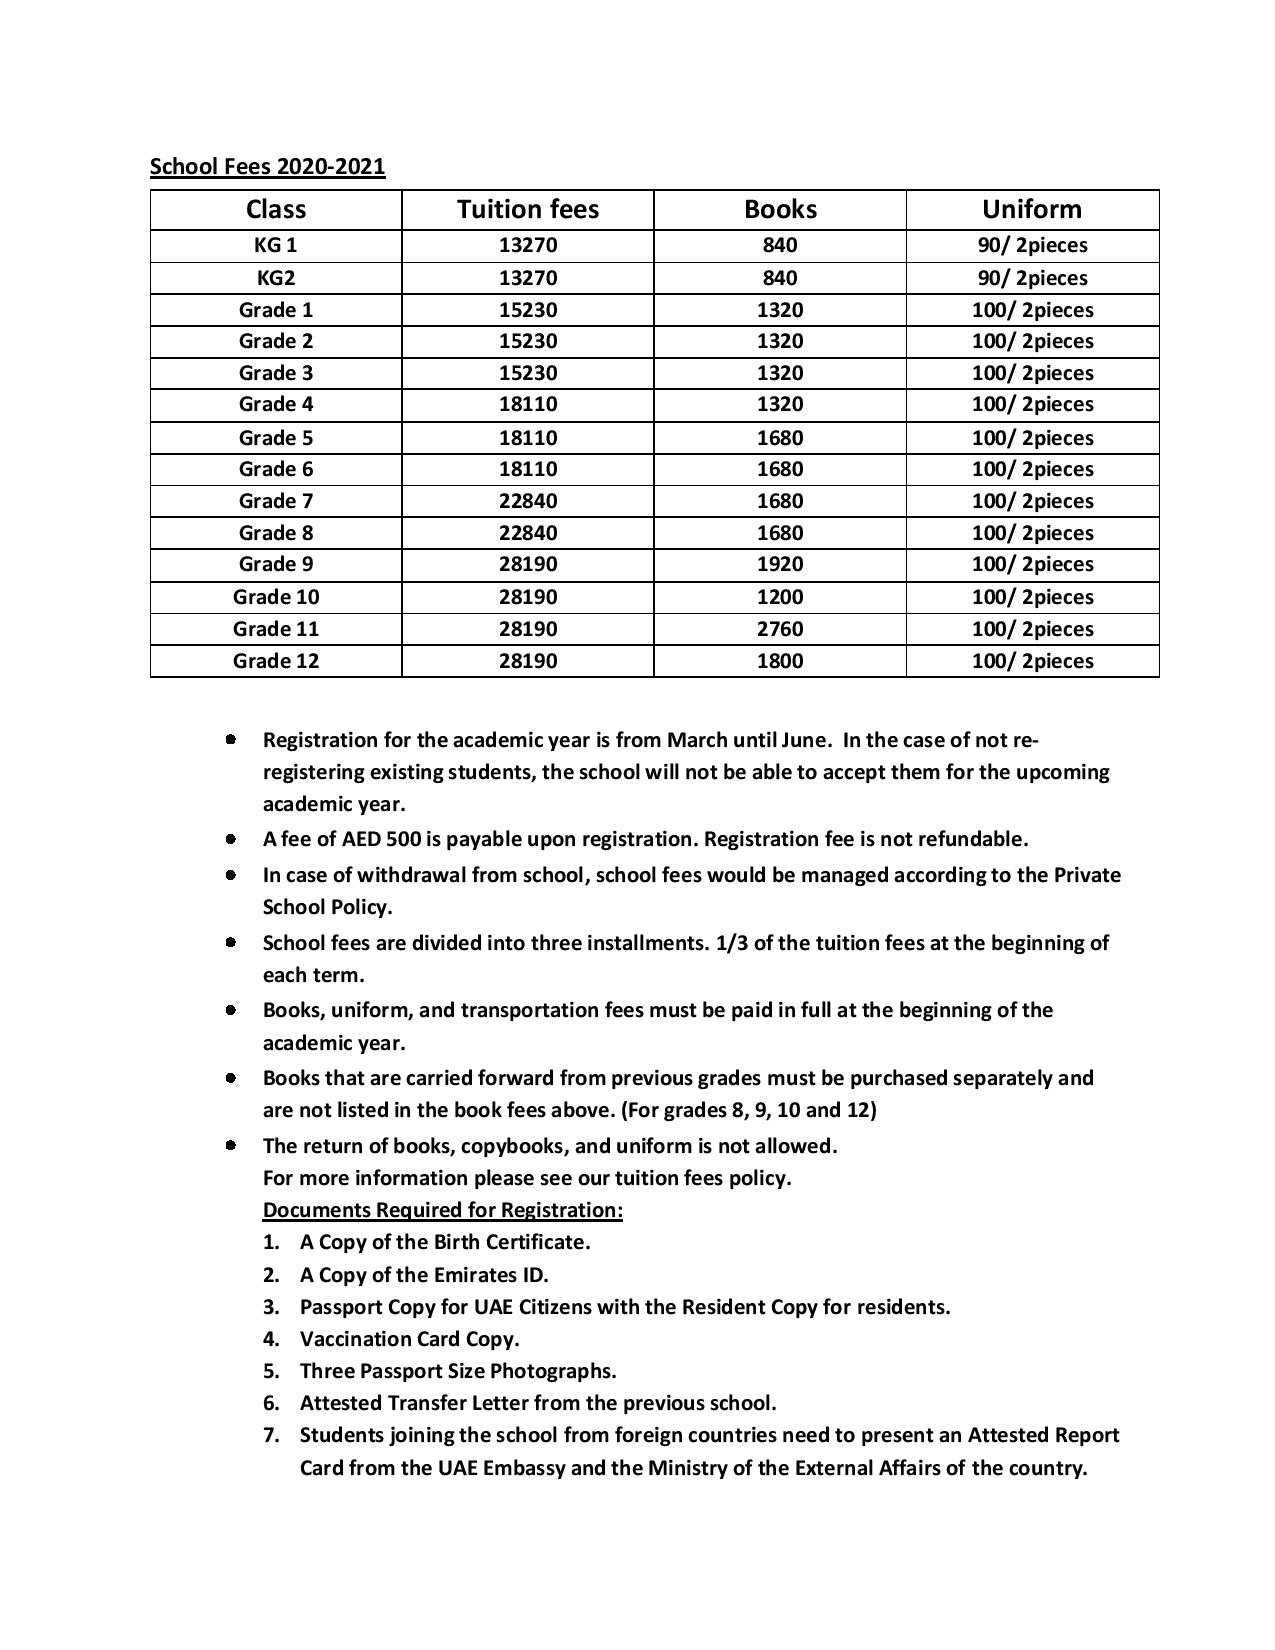 New-Fees-page-001-1